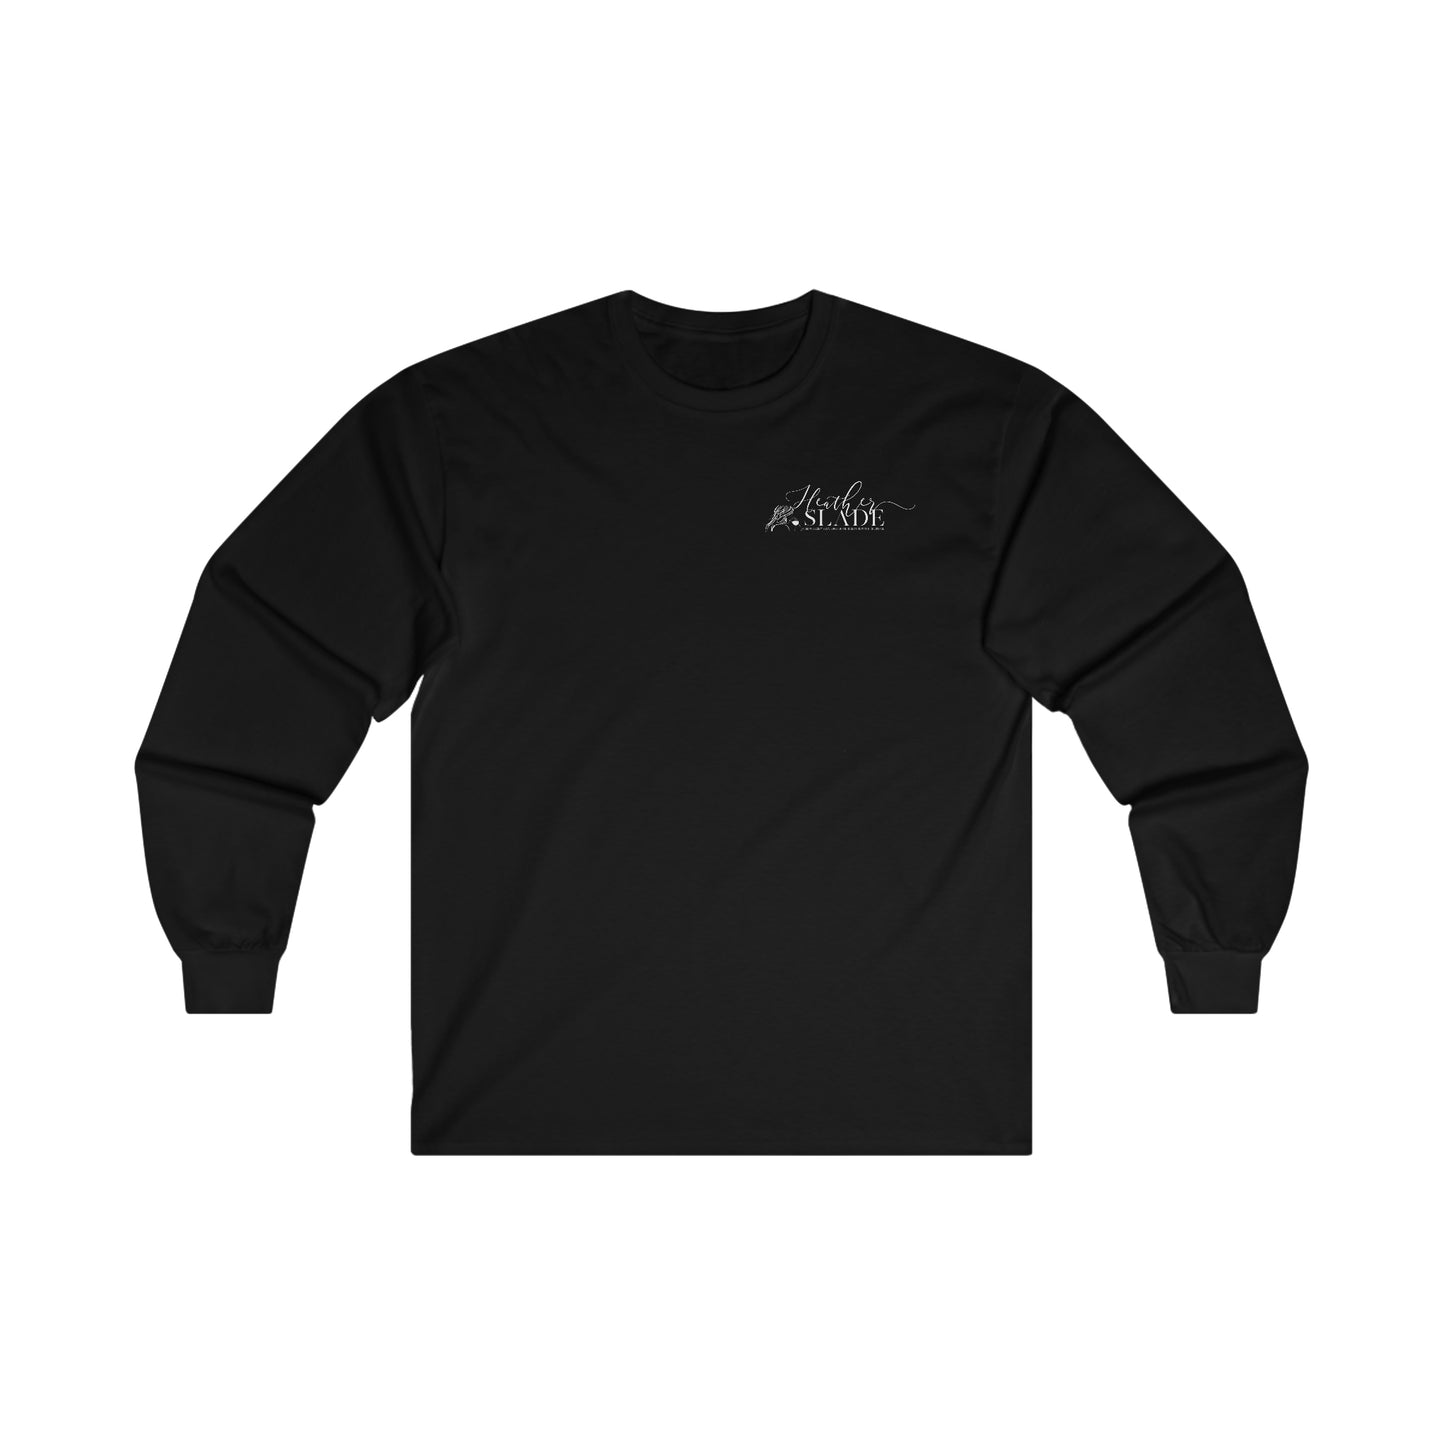 K19 Security Solutions Team Two Ultra Cotton Long Sleeve Tee